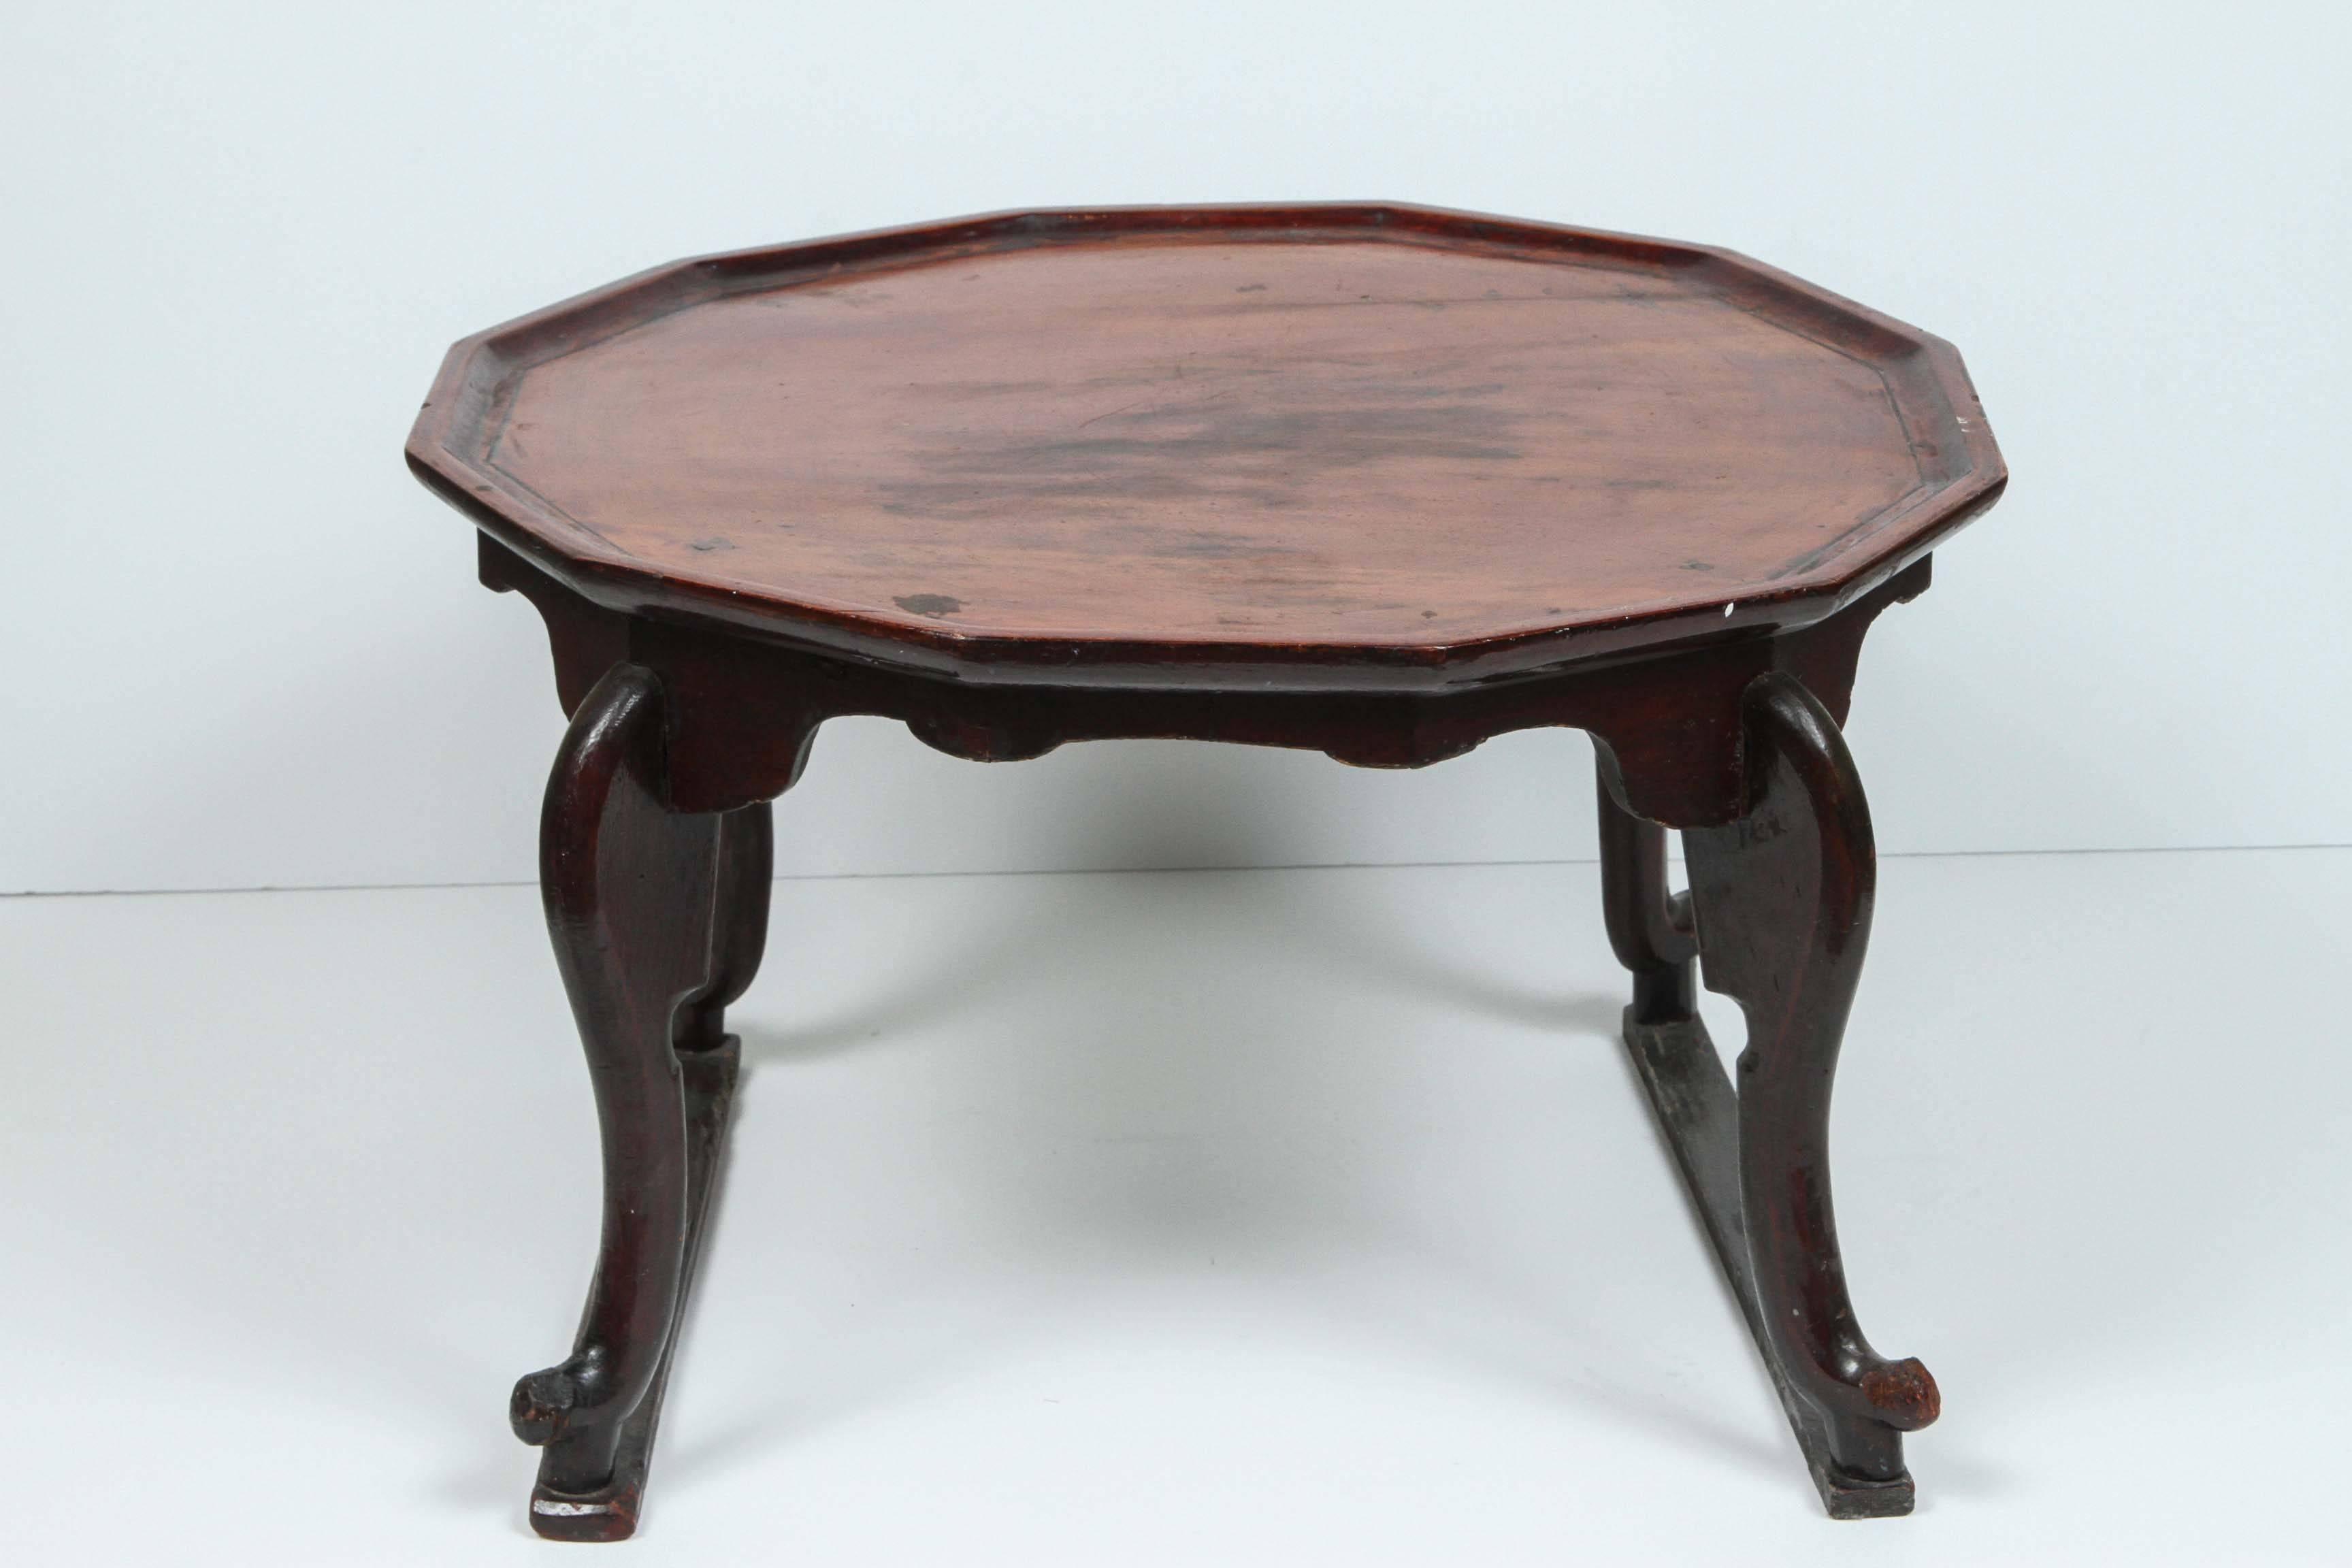 A Korean wood low table Soban, circa 19th century with dodecagonal galleried top, shaped apron, curved 